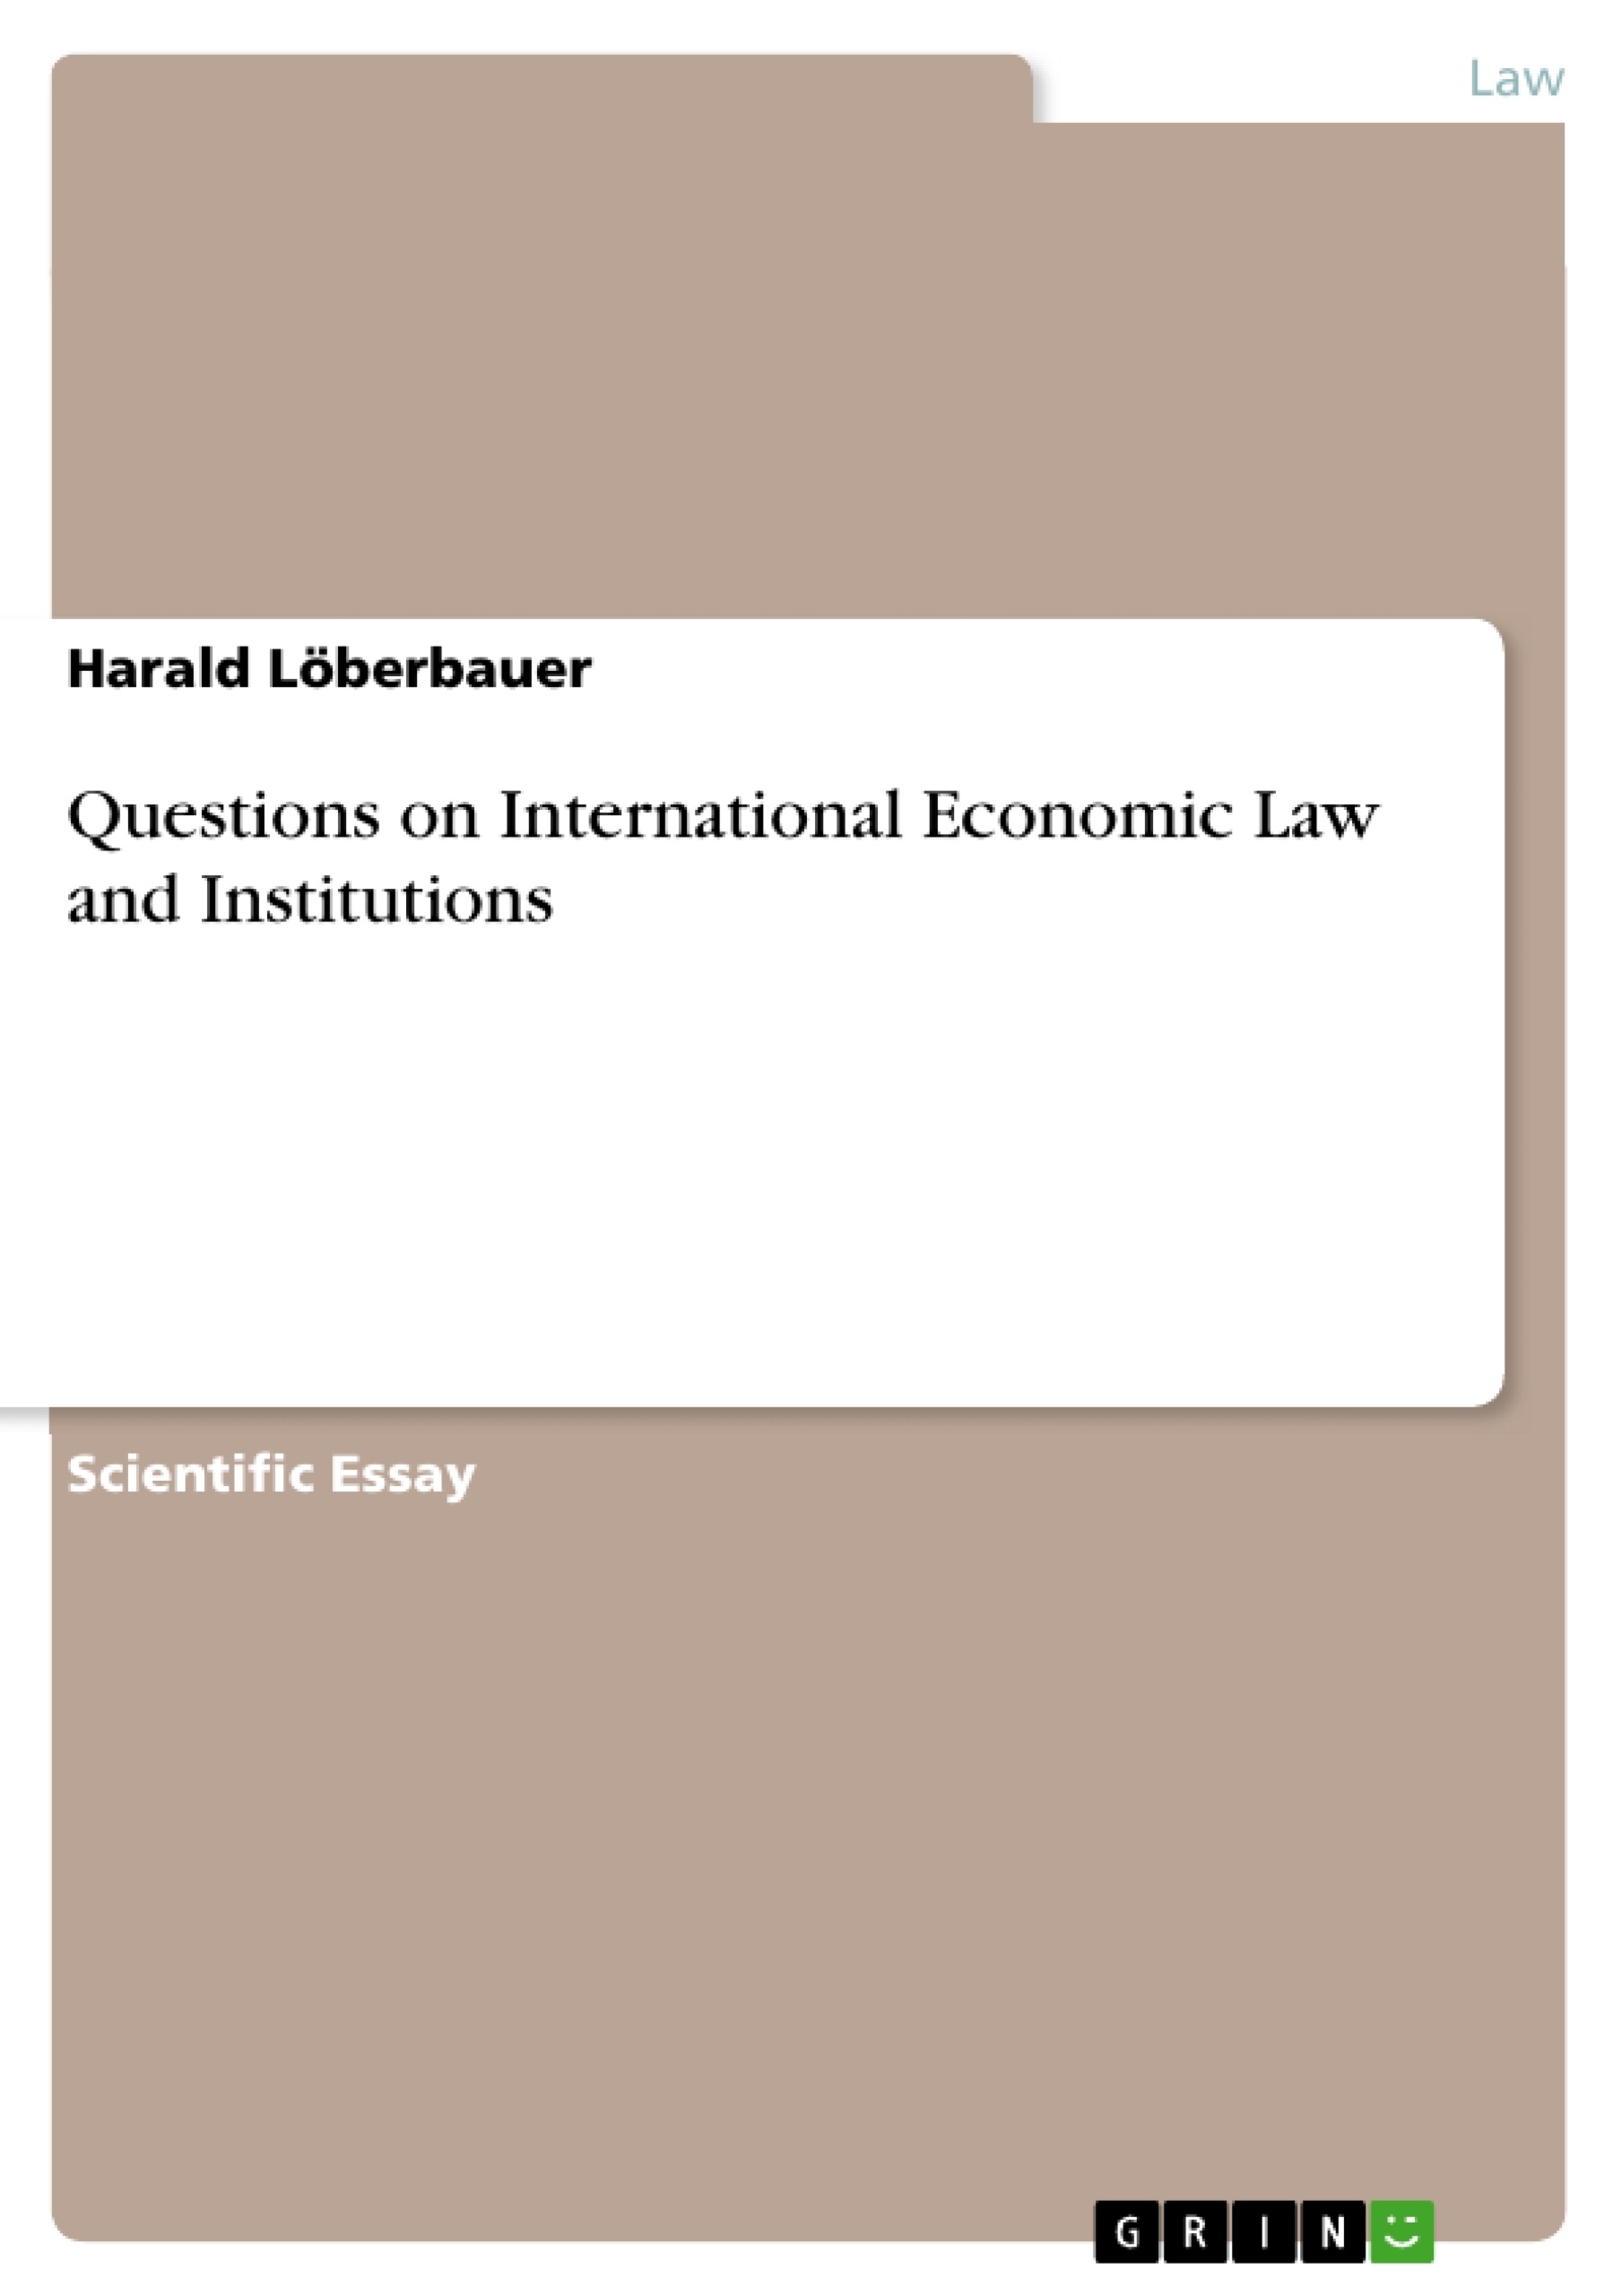 Título: Questions on International Economic Law and Institutions